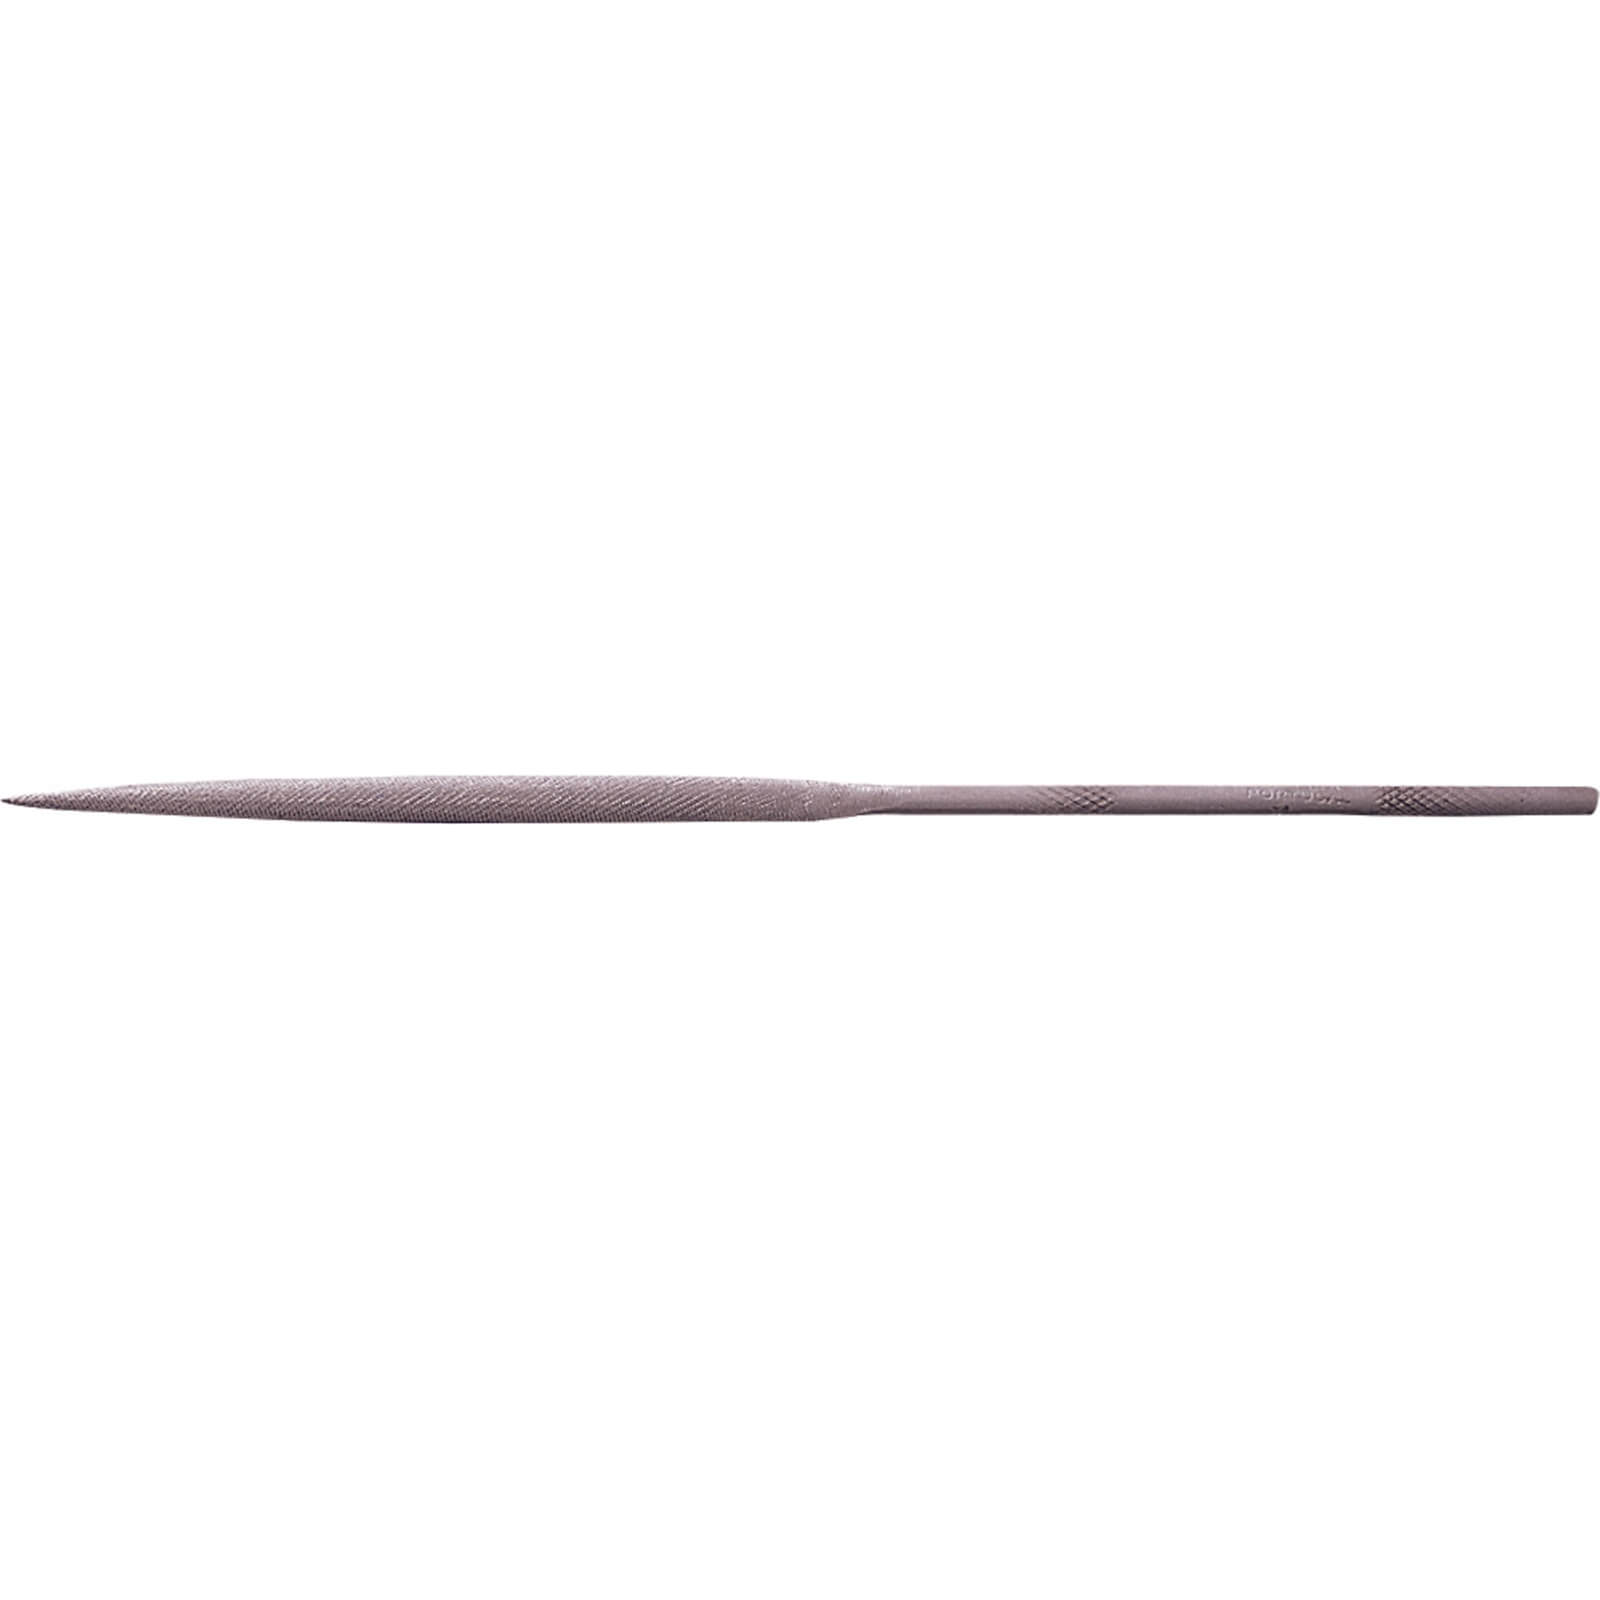 Image of Draper Half Round Needle File 160mm No 2 Pack of 12